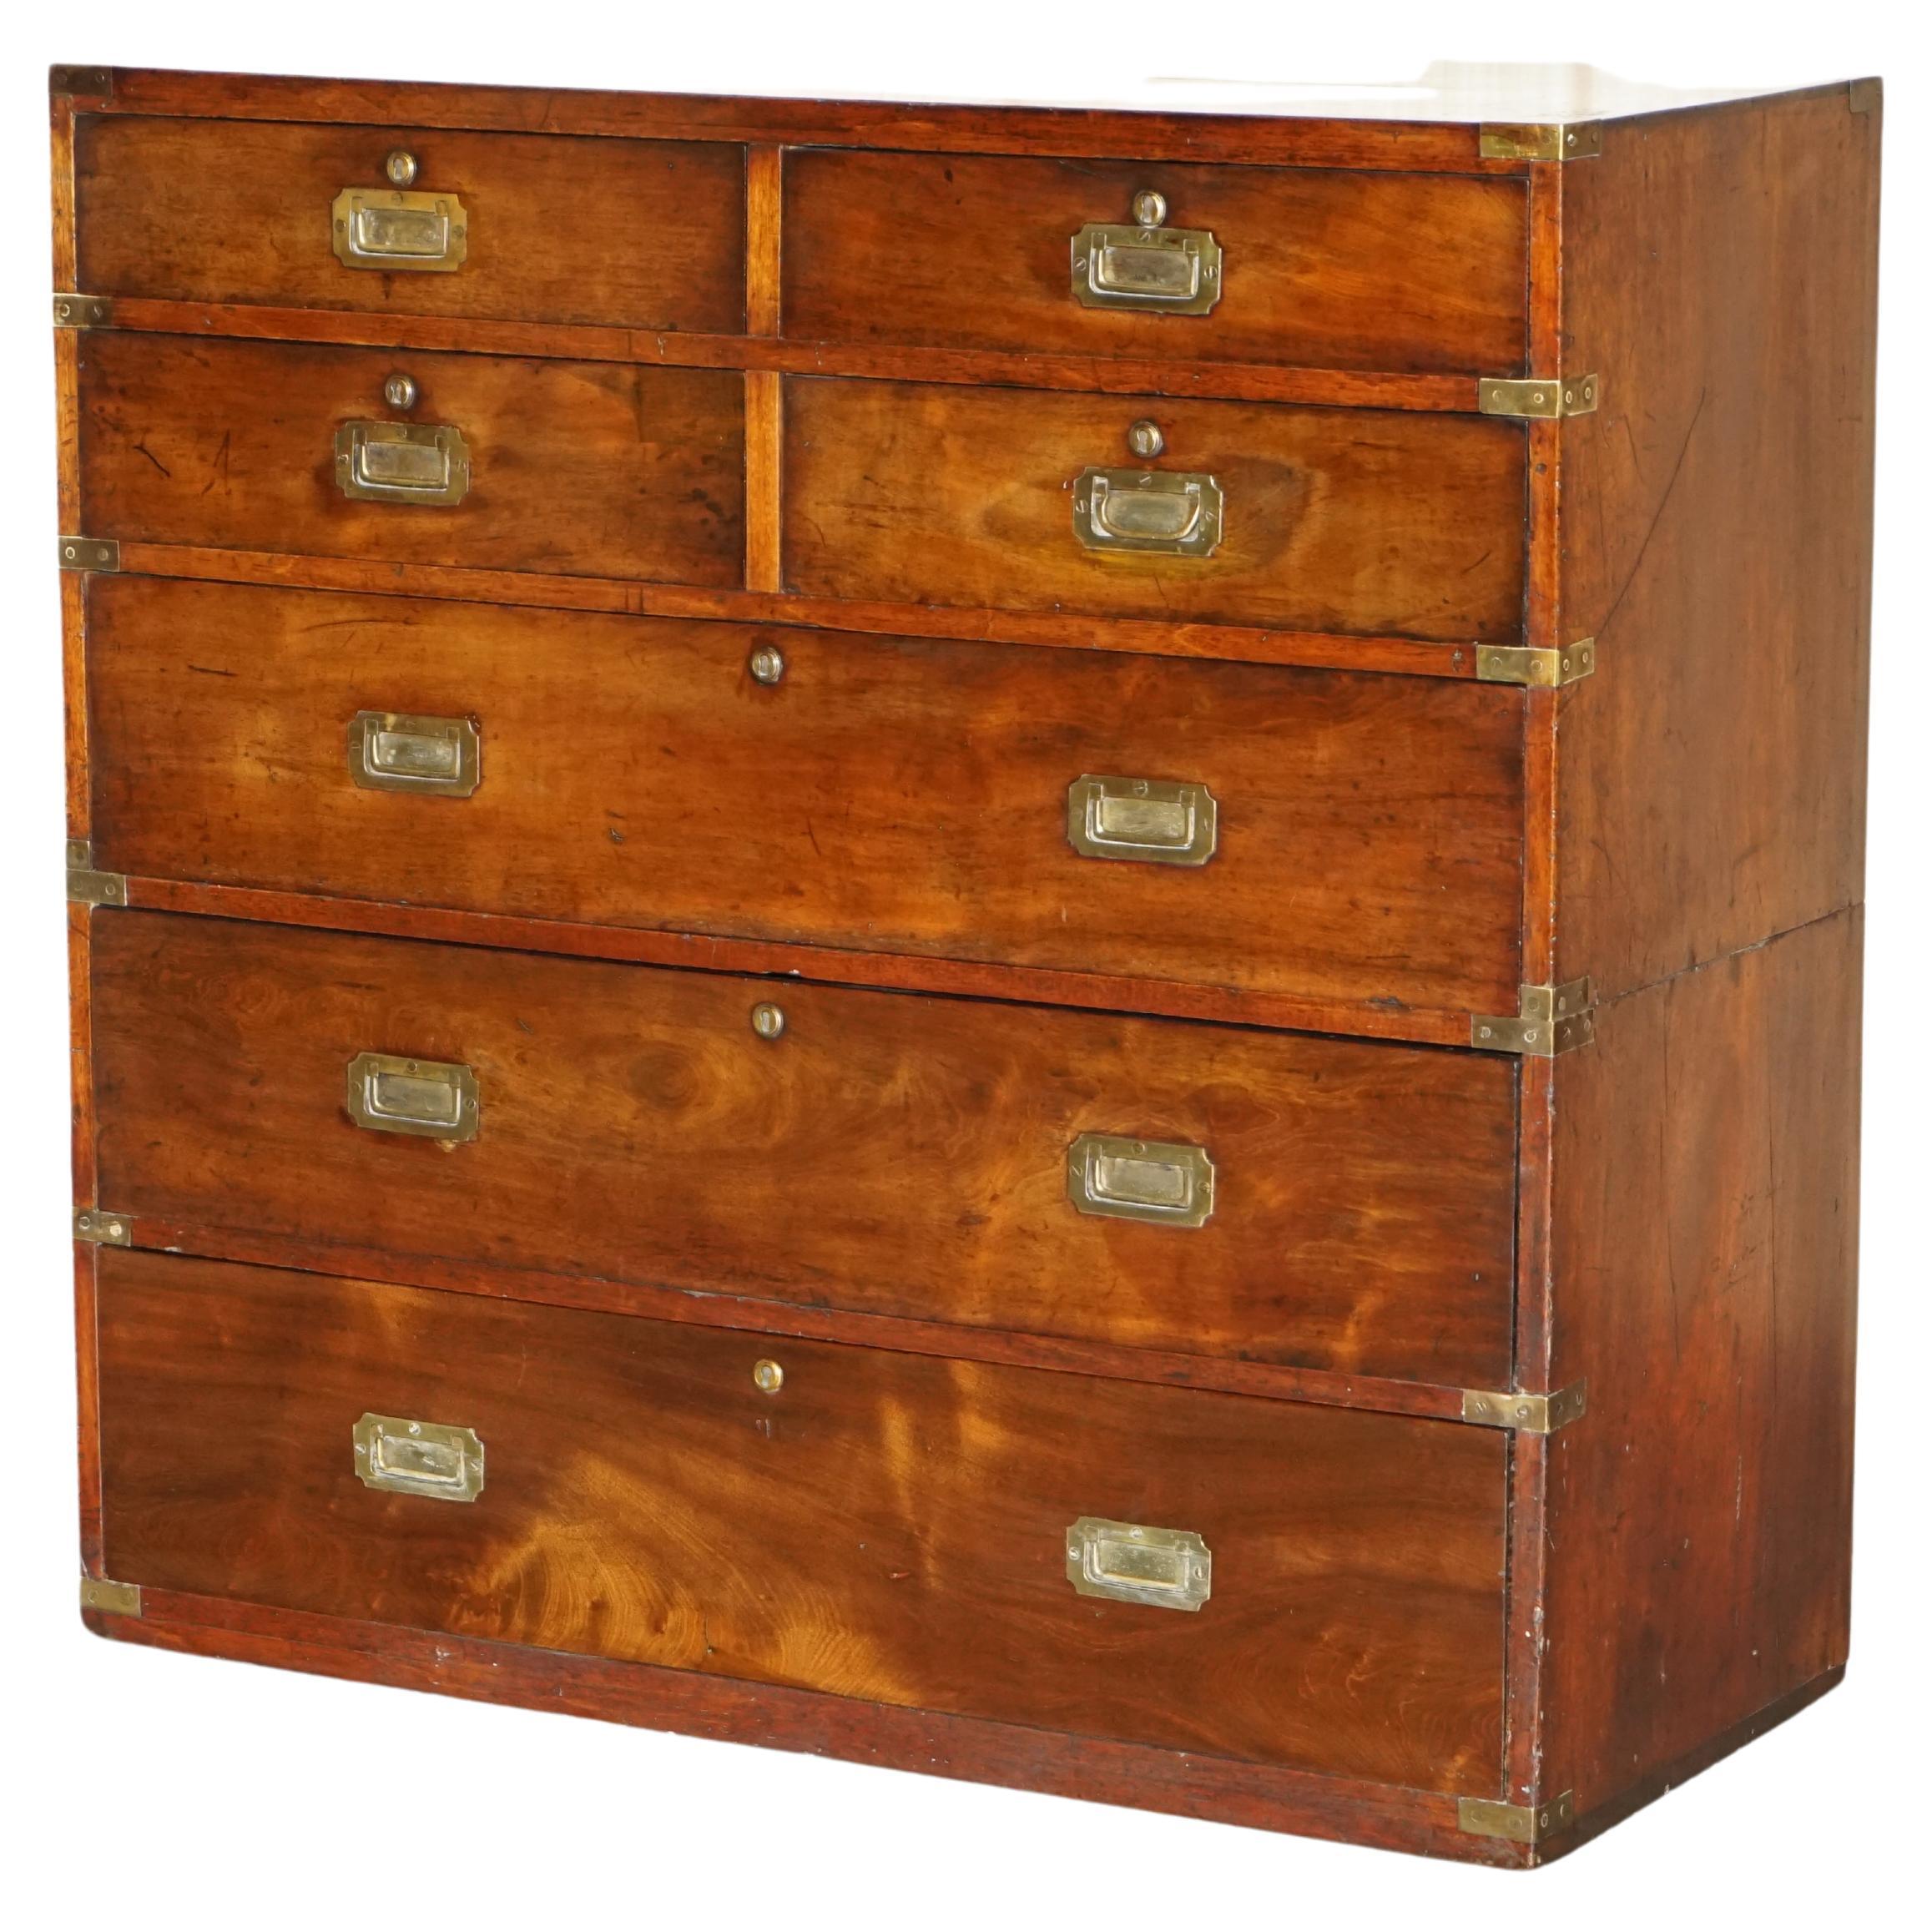 Fully Restored Honduras Hardwood Antique Military Campaign Chest of Drawers